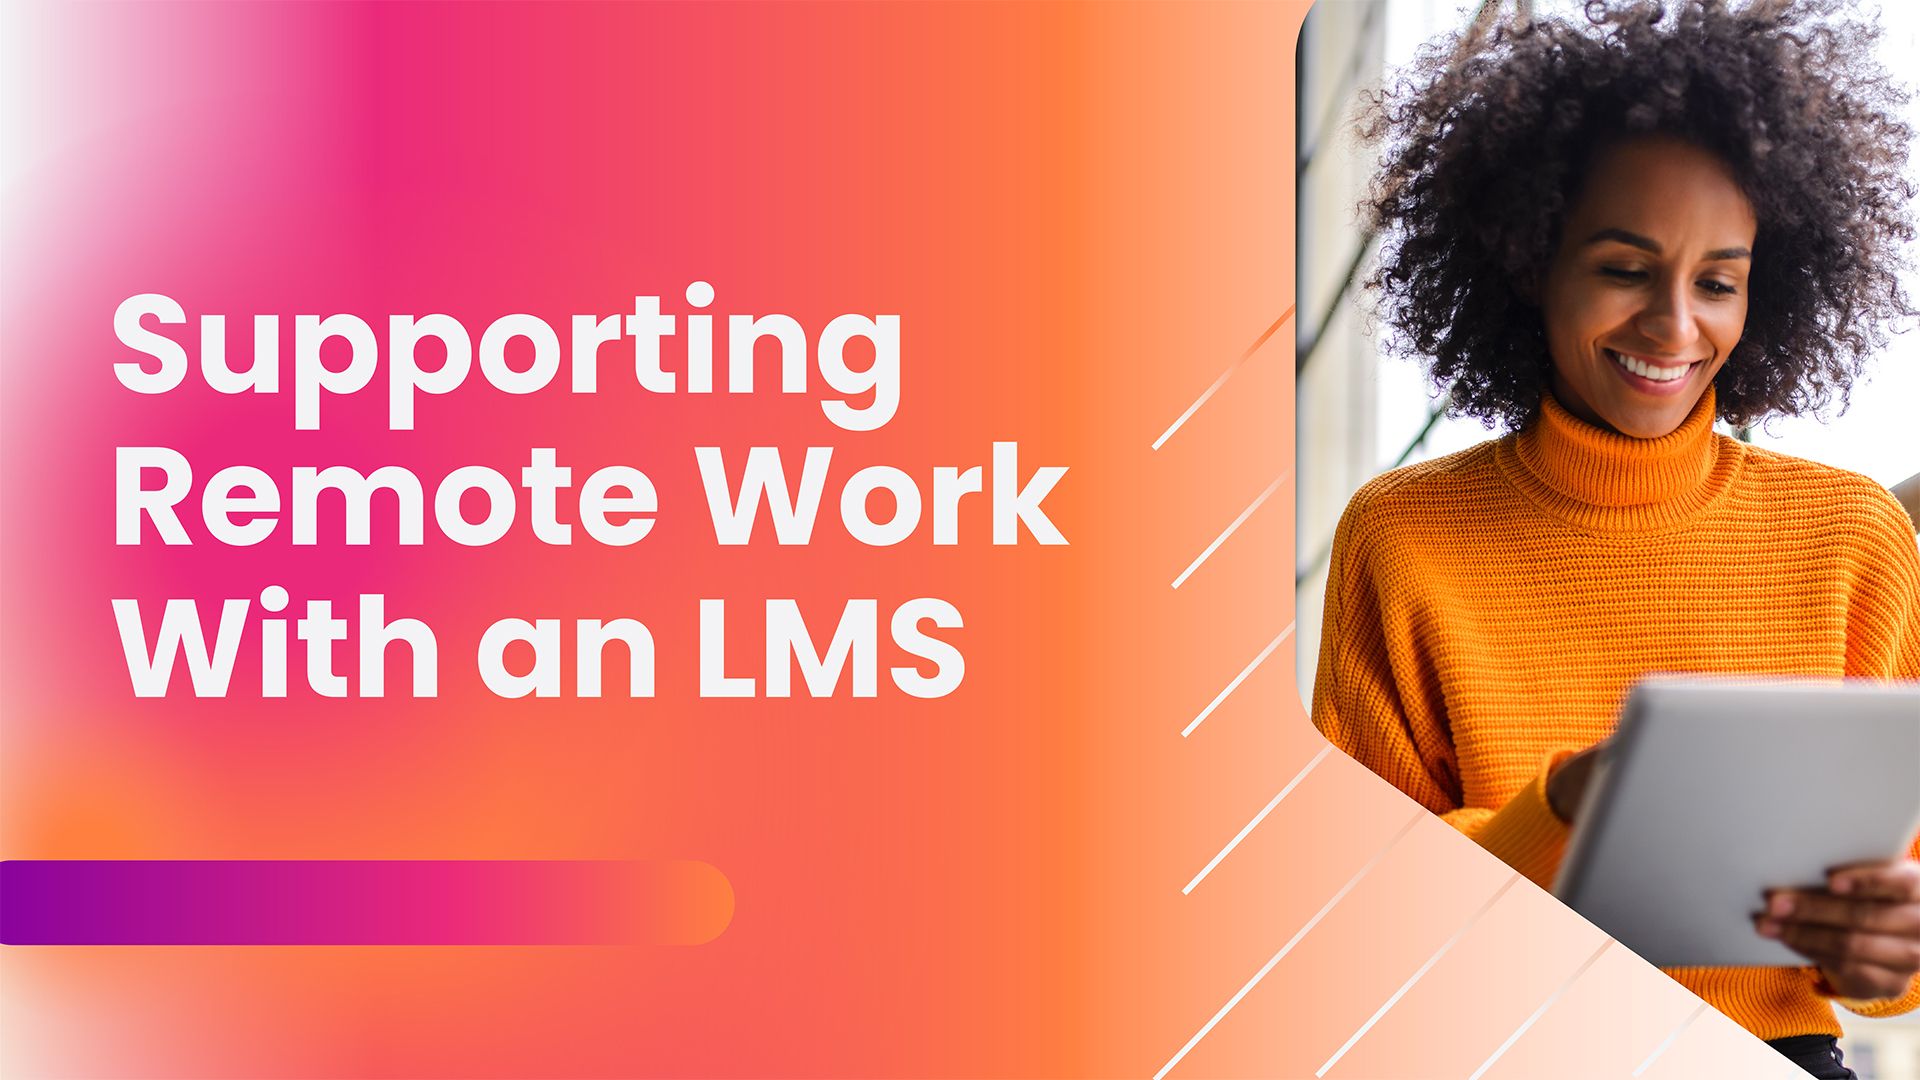 Supporting Remote Work With an LMS: 5 Big Benefits for Any Business